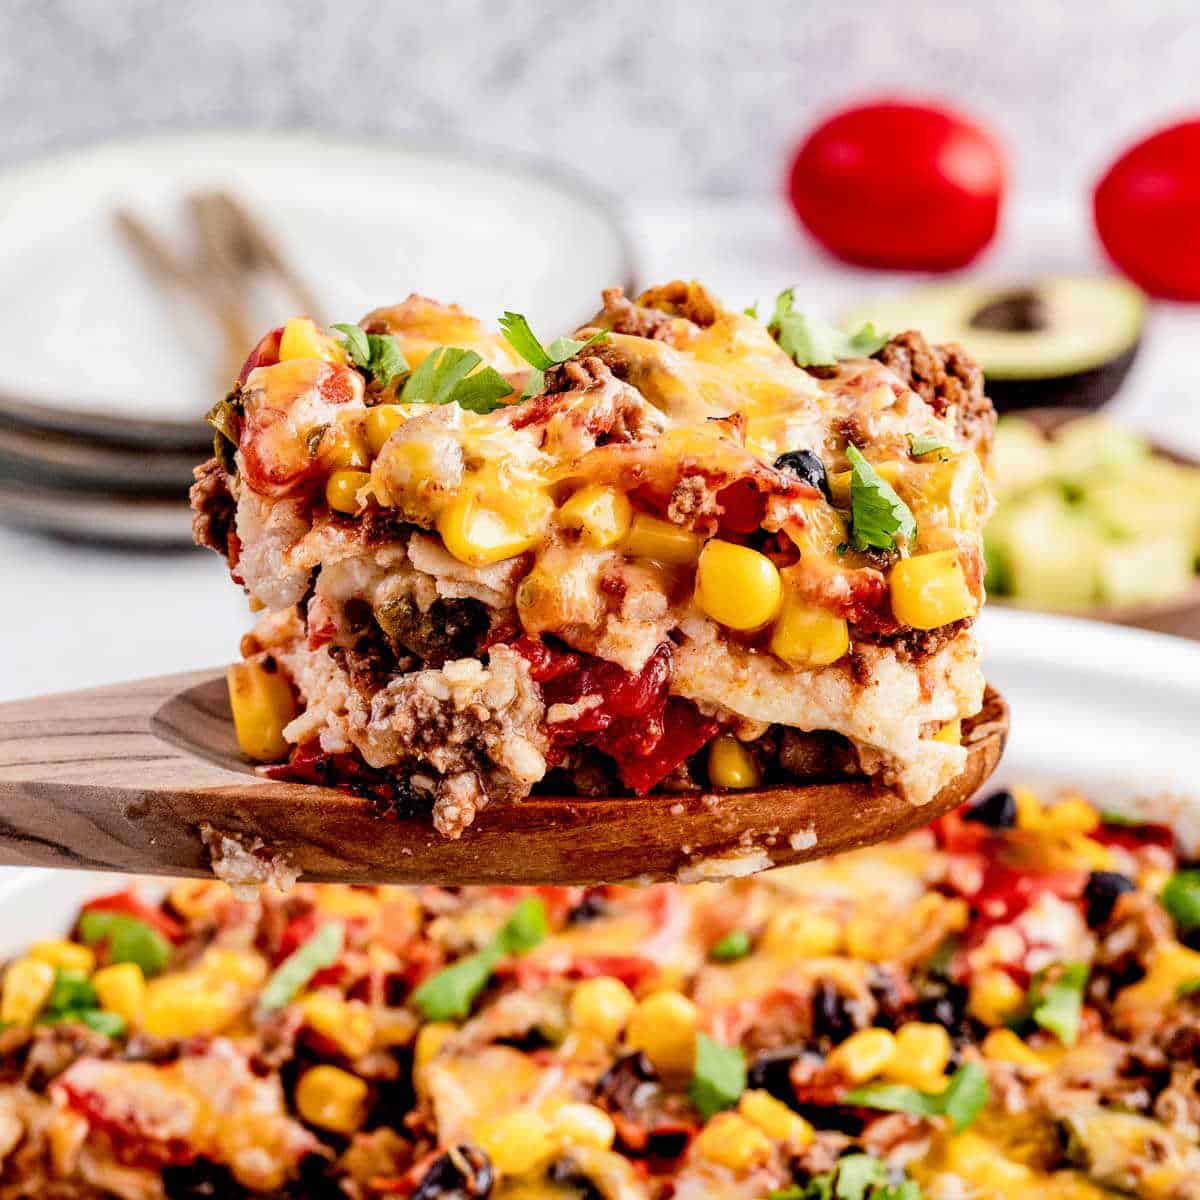 https://www.hauteandhealthyliving.com/wp-content/uploads/2023/06/easy-Mexican-casserole-with-tortillas-14-1.jpg